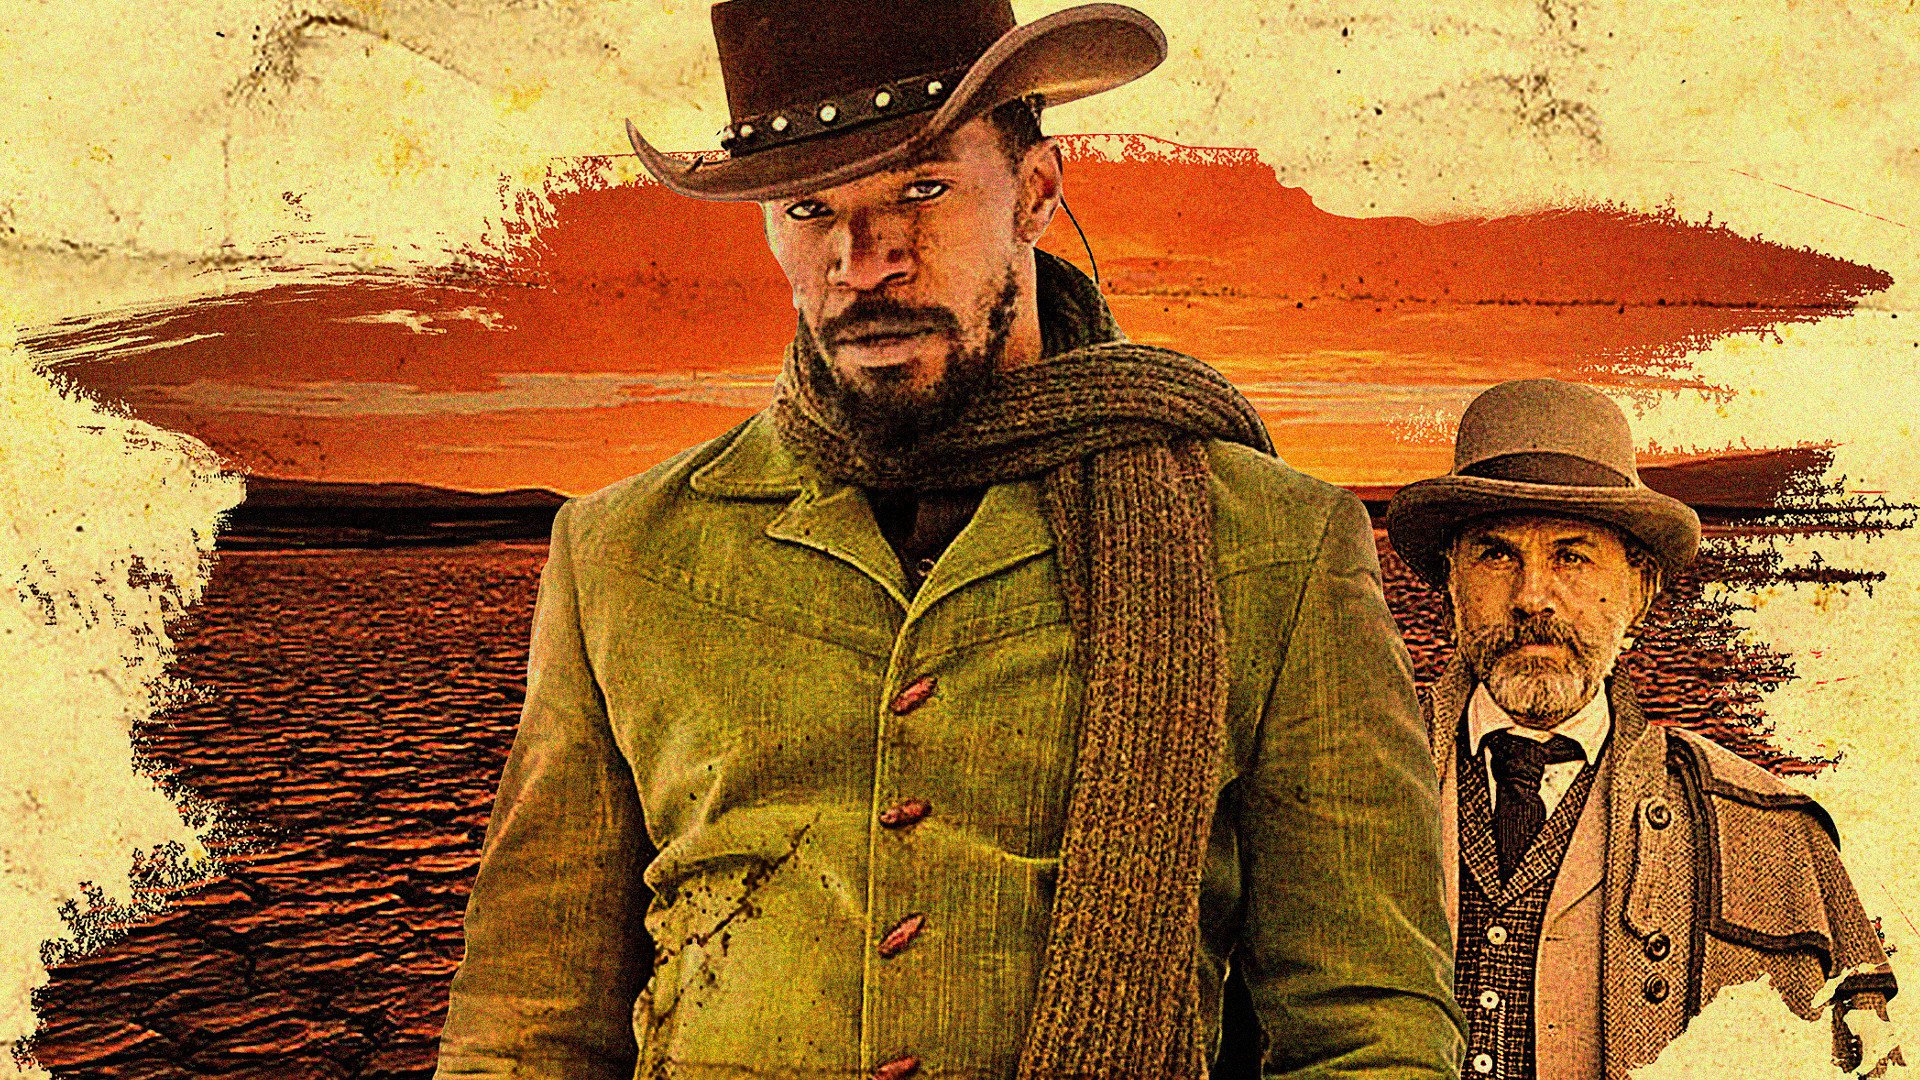  Django Unchained Wallpapers Pictures Images